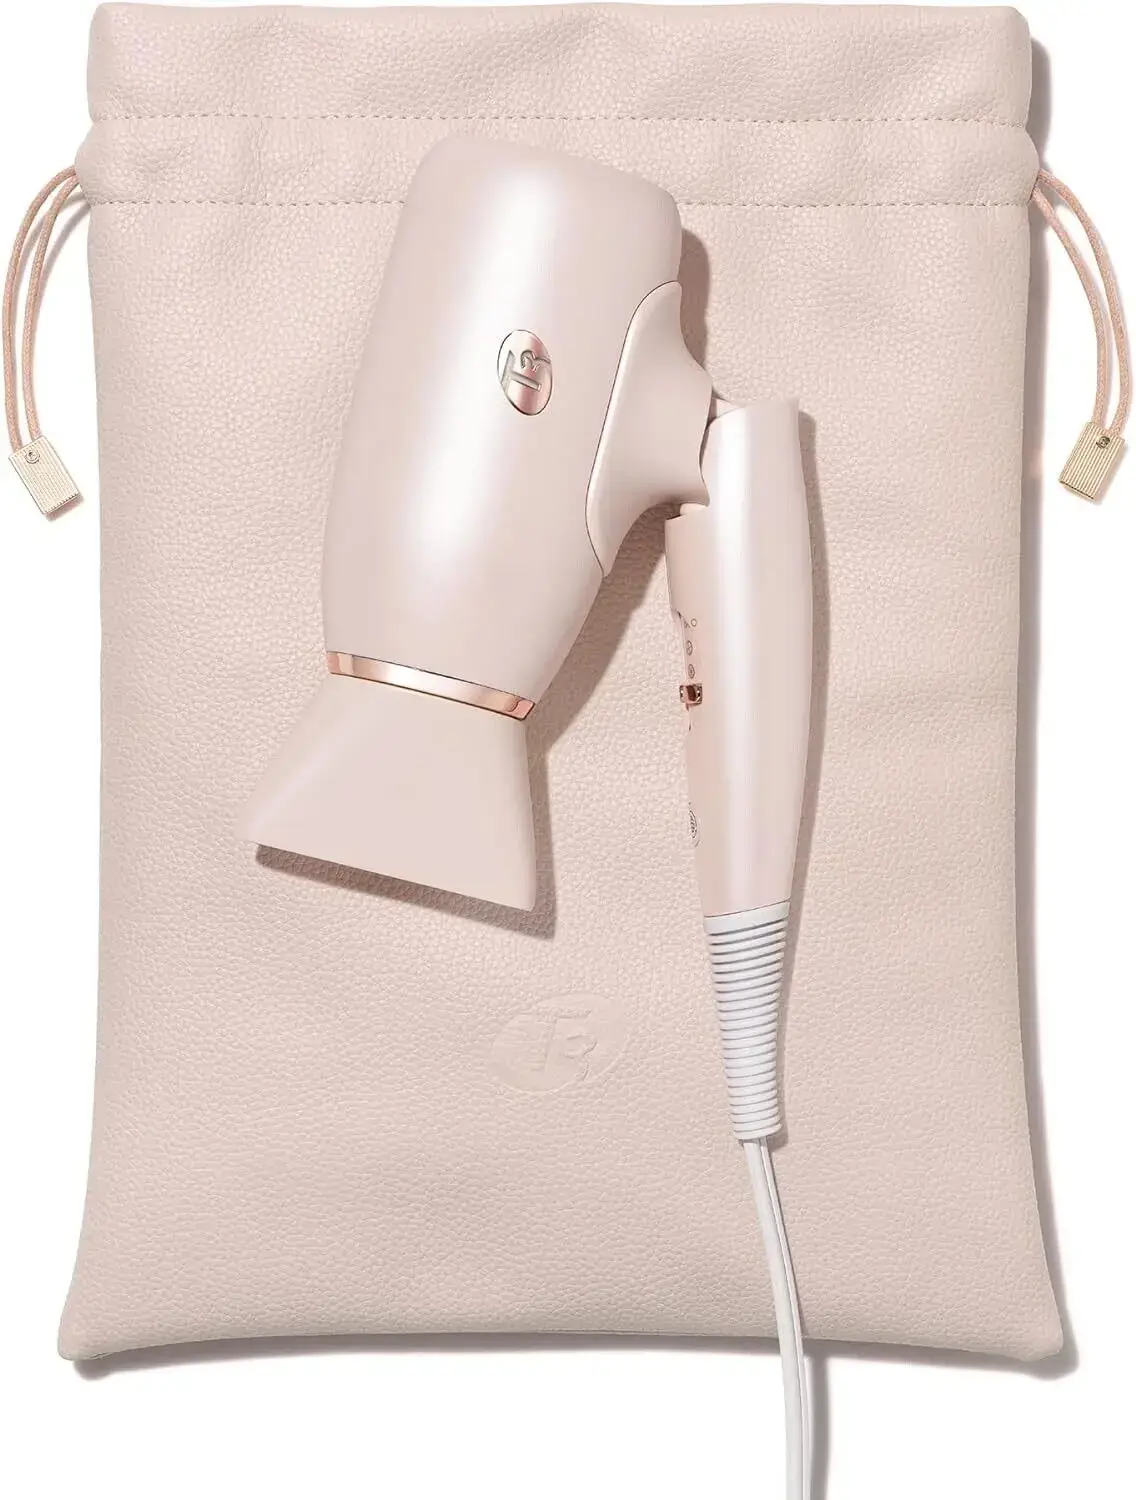 Elegant hair dryer with pouch on a beige background.